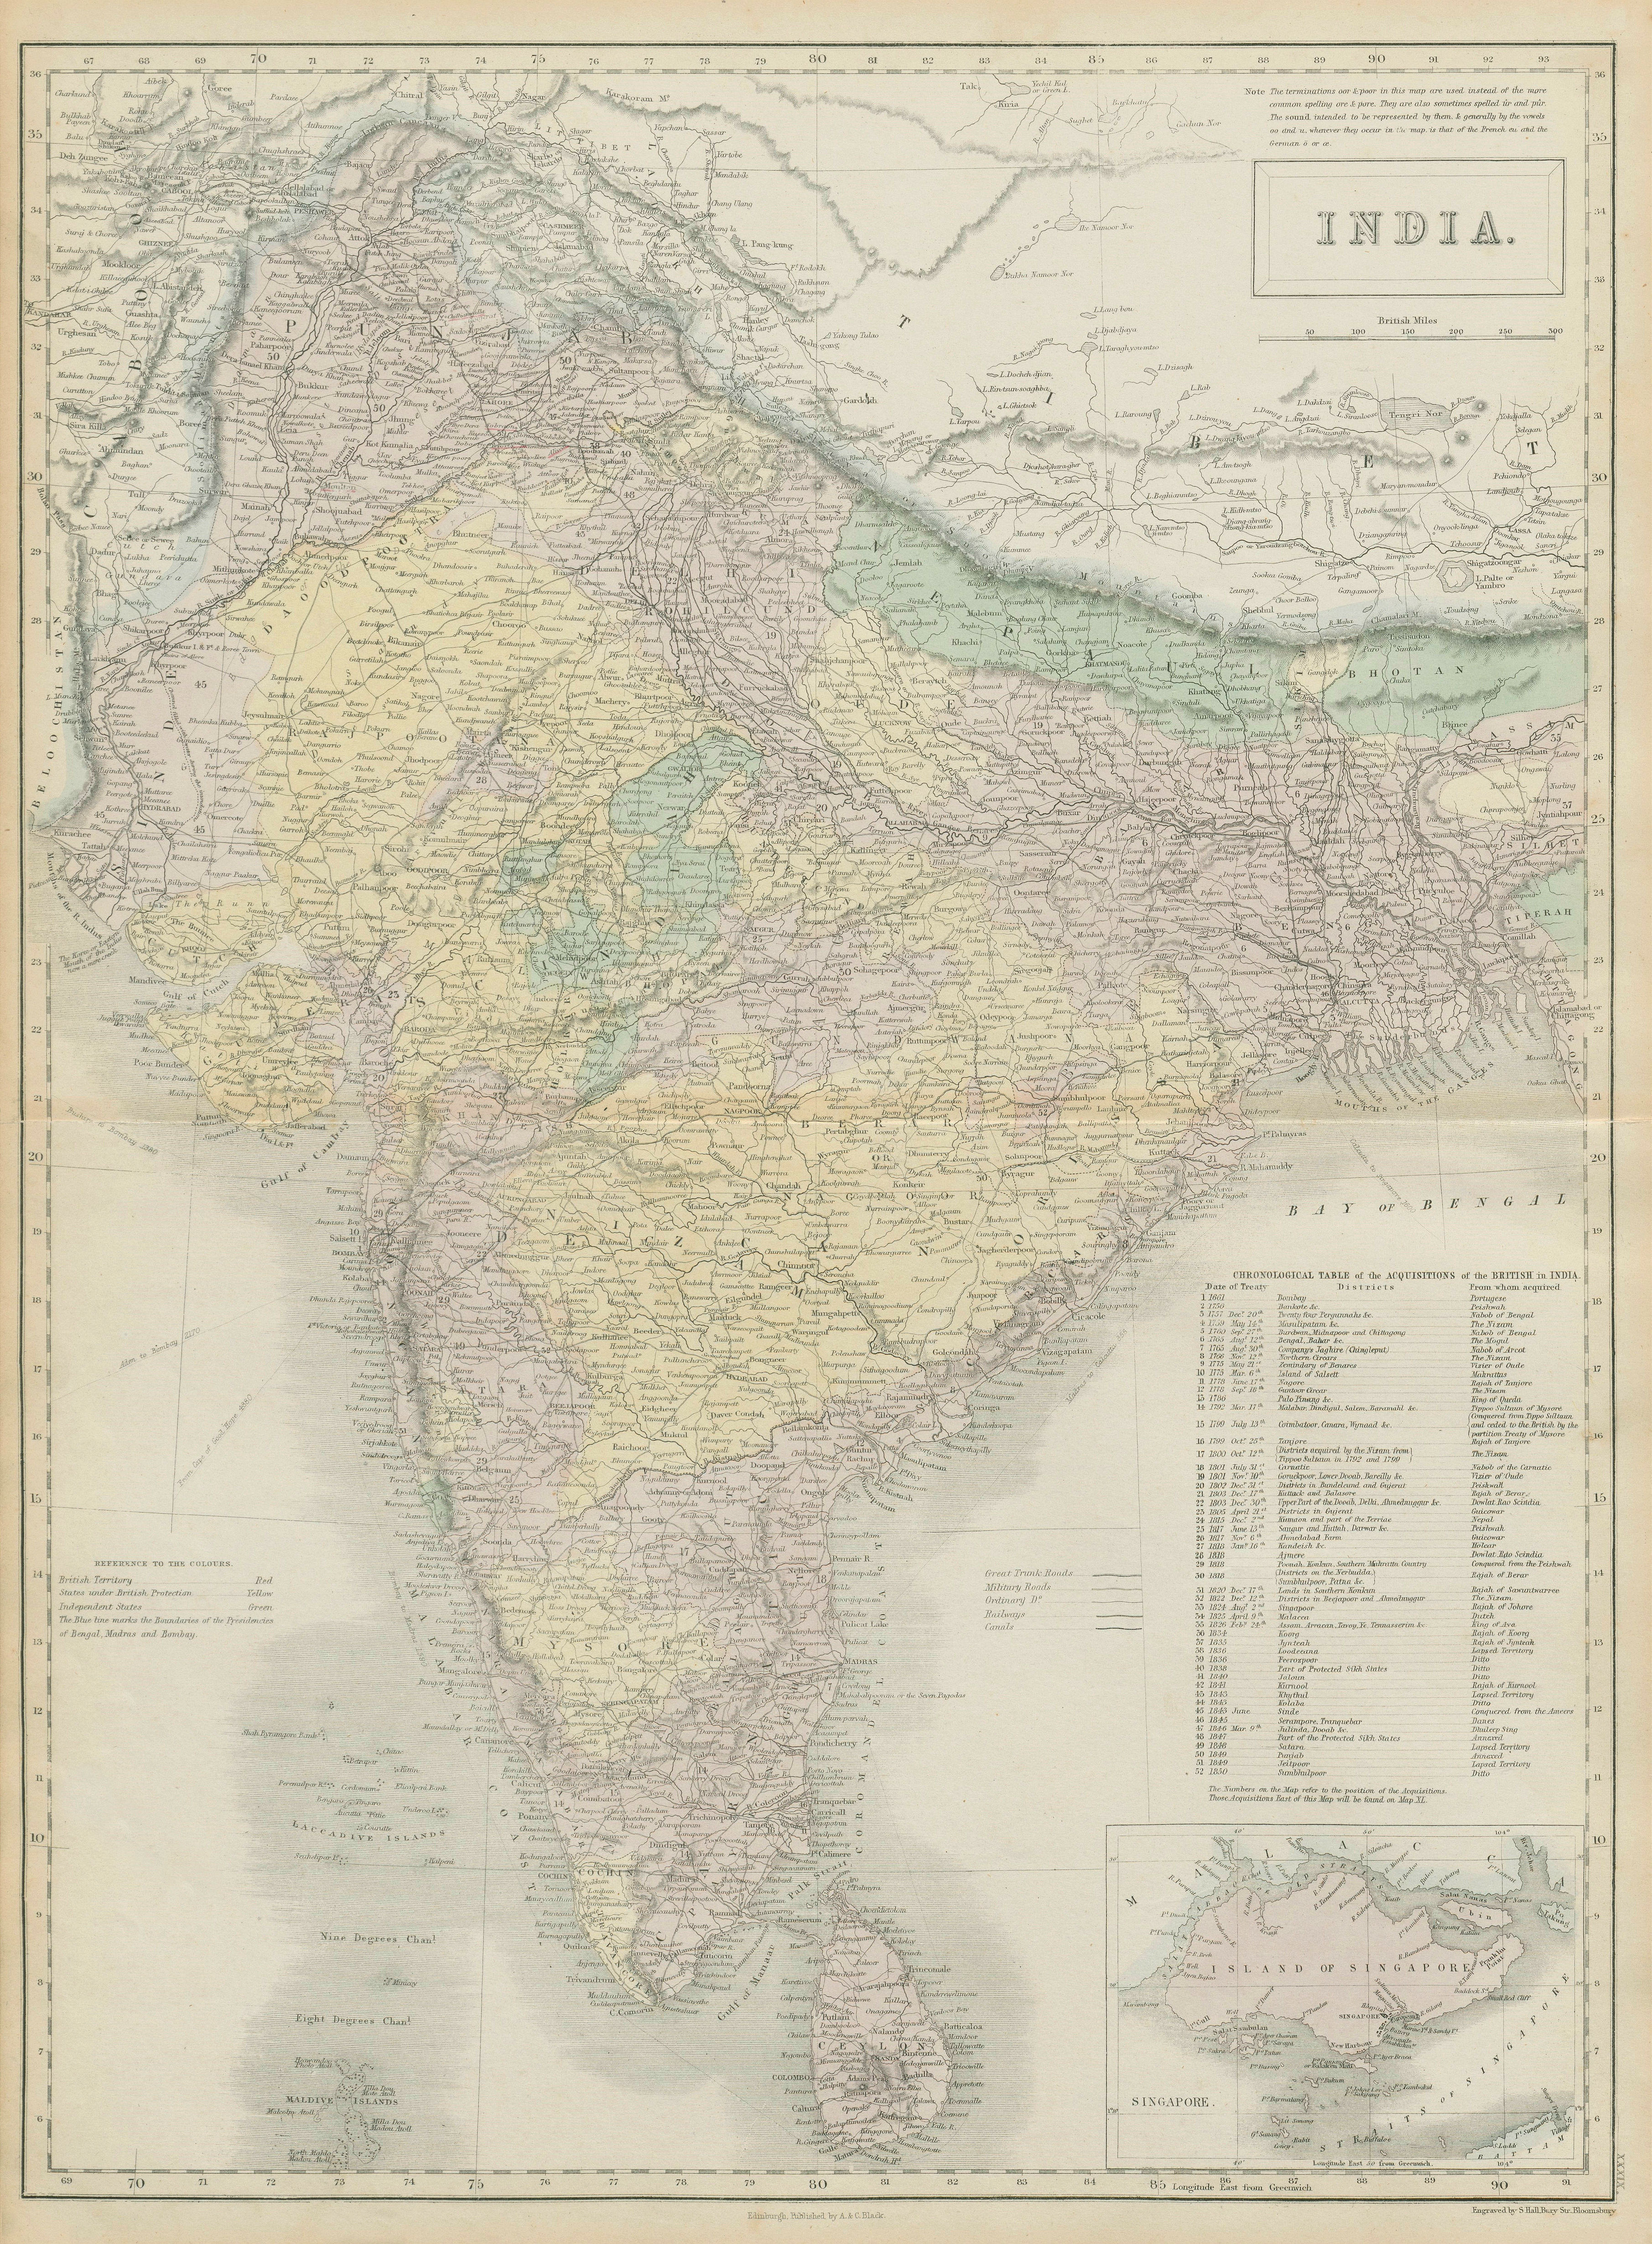 Associate Product British India. Inset Singapore plan. SIDNEY HALL 1856 old antique map chart